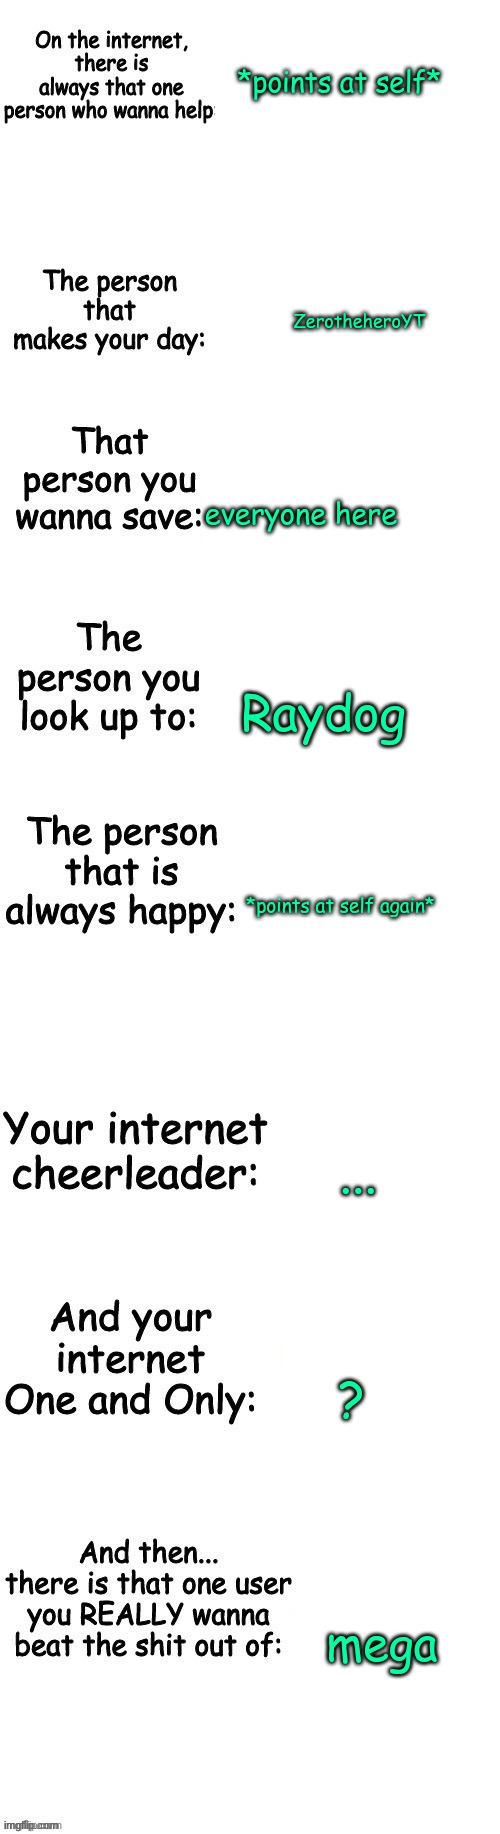 People on the internet | *points at self*; ZerotheheroYT; everyone here; Raydog; *points at self again*; ... ? mega | image tagged in people on the internet | made w/ Imgflip meme maker